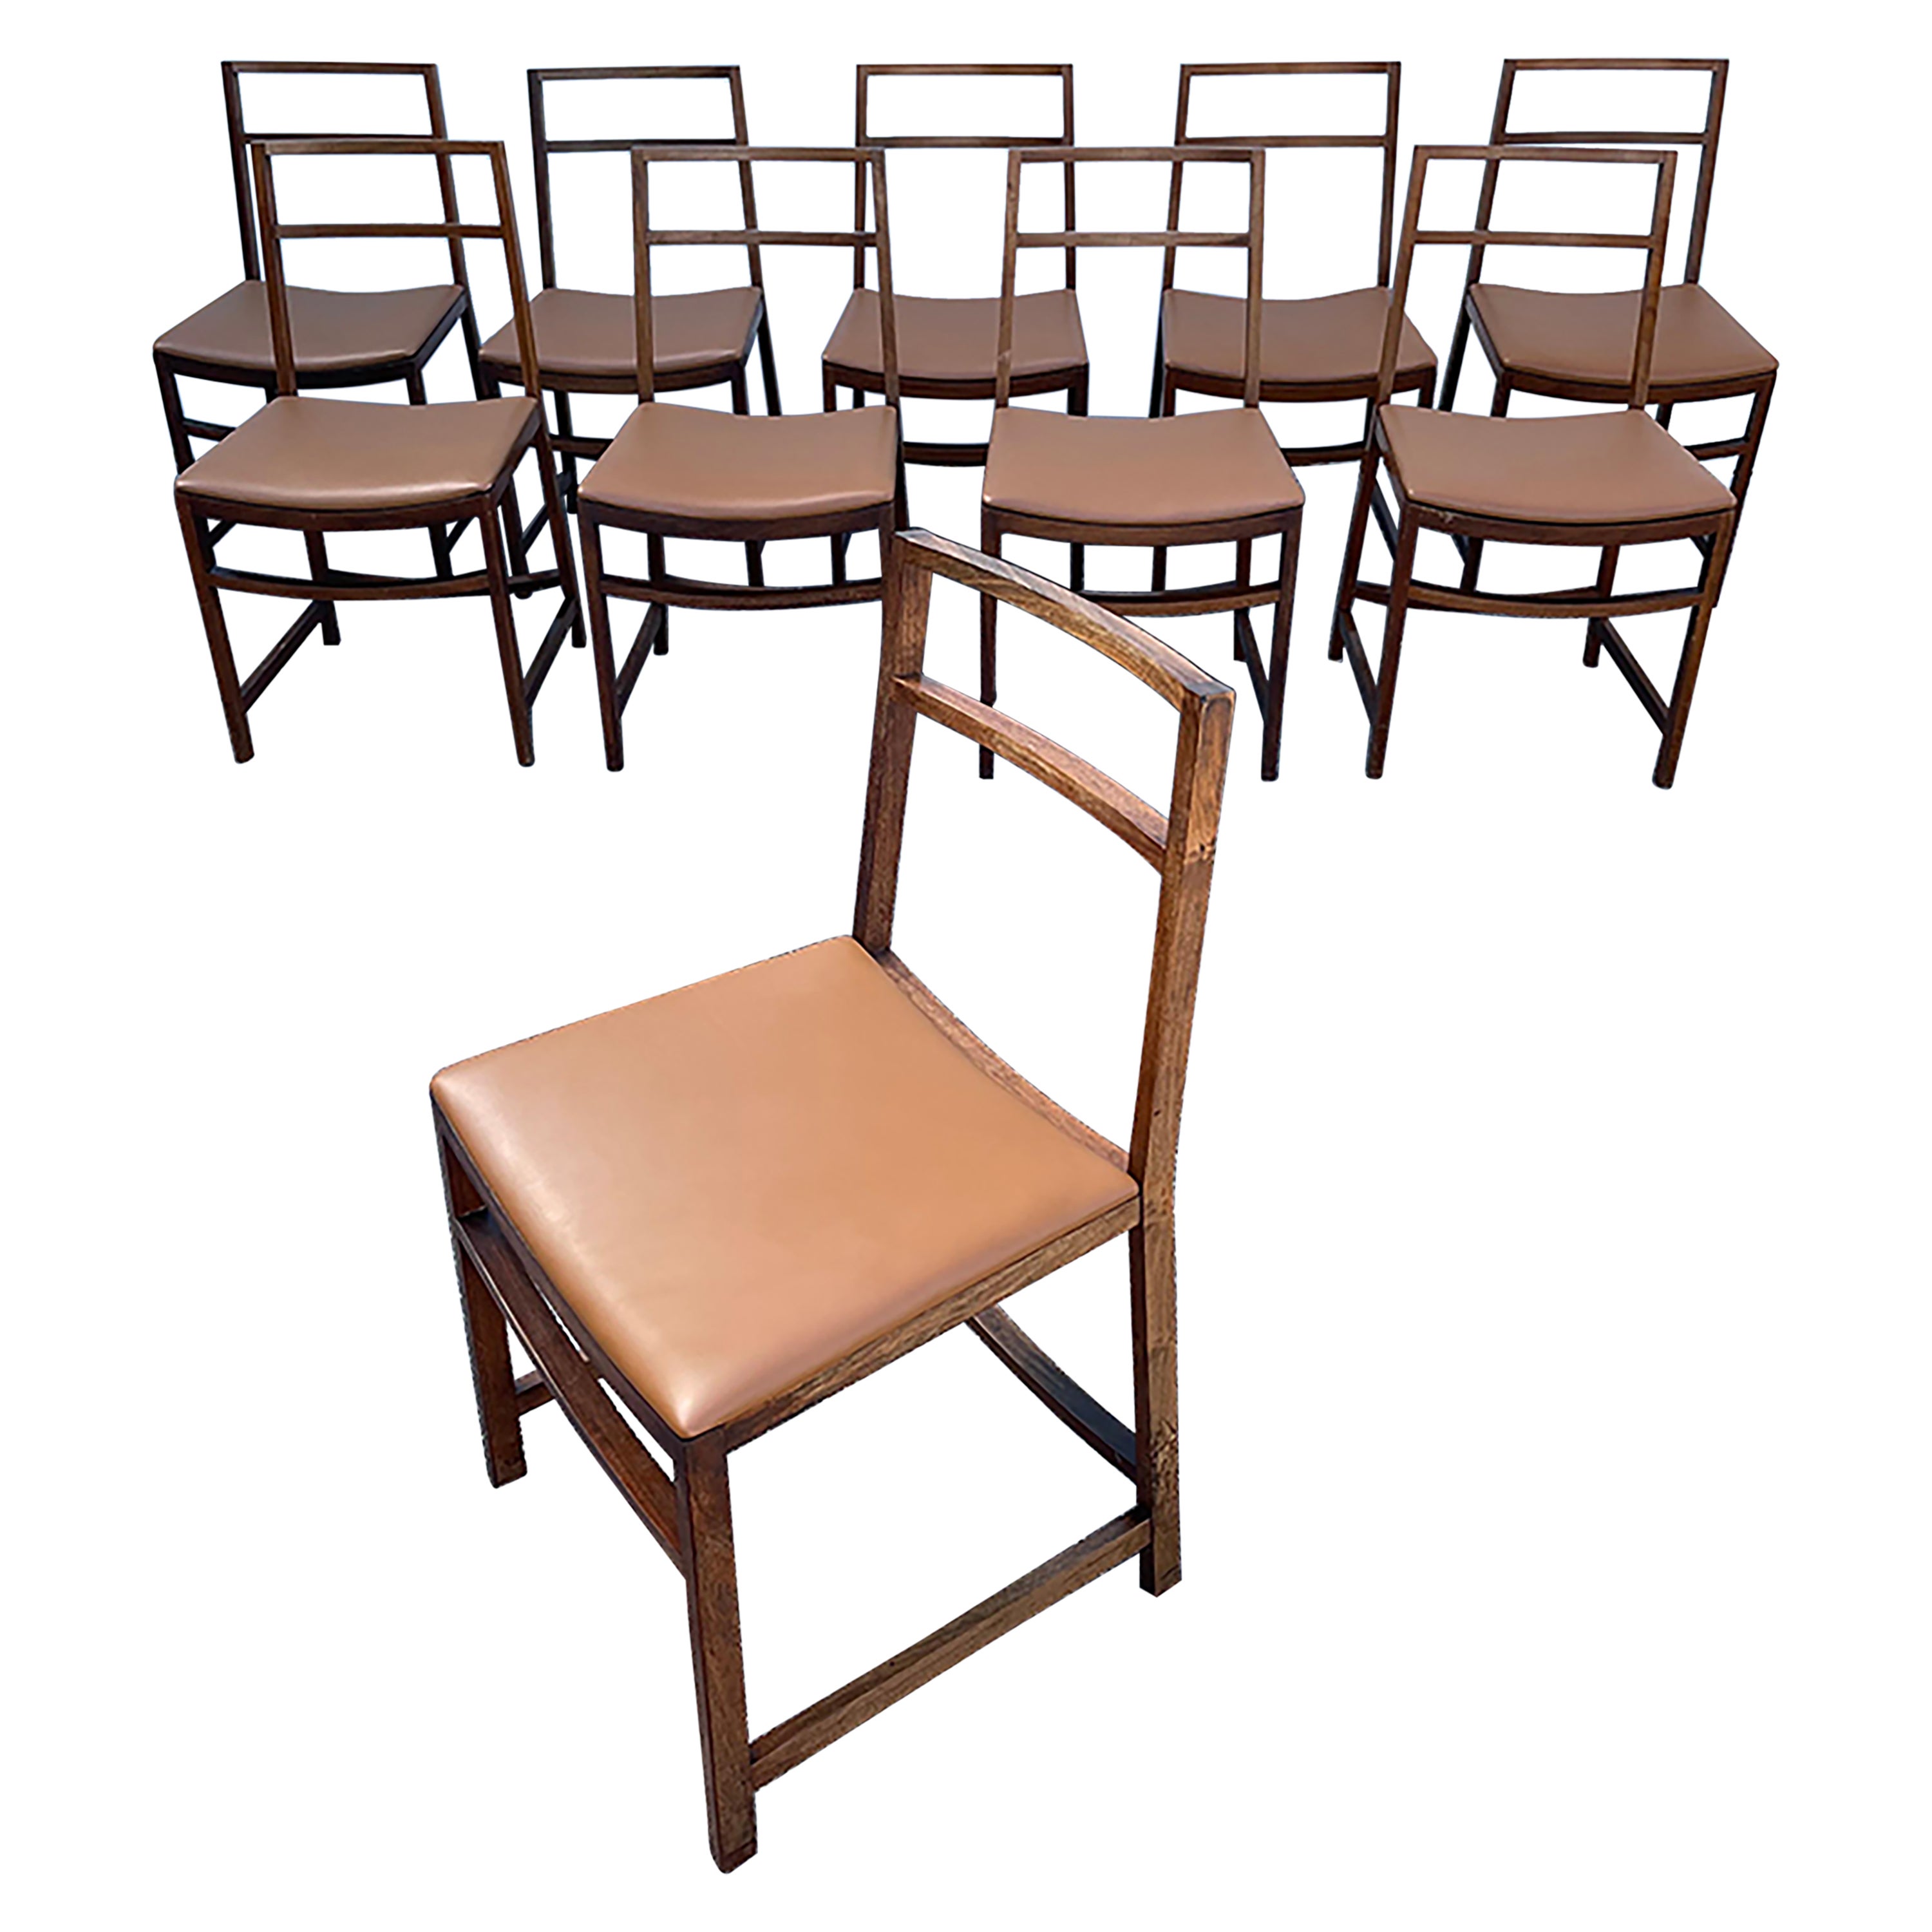 Set of 10 Mid-Century Modern Dining Chairs by Renato Venturi for MIM Roma For Sale